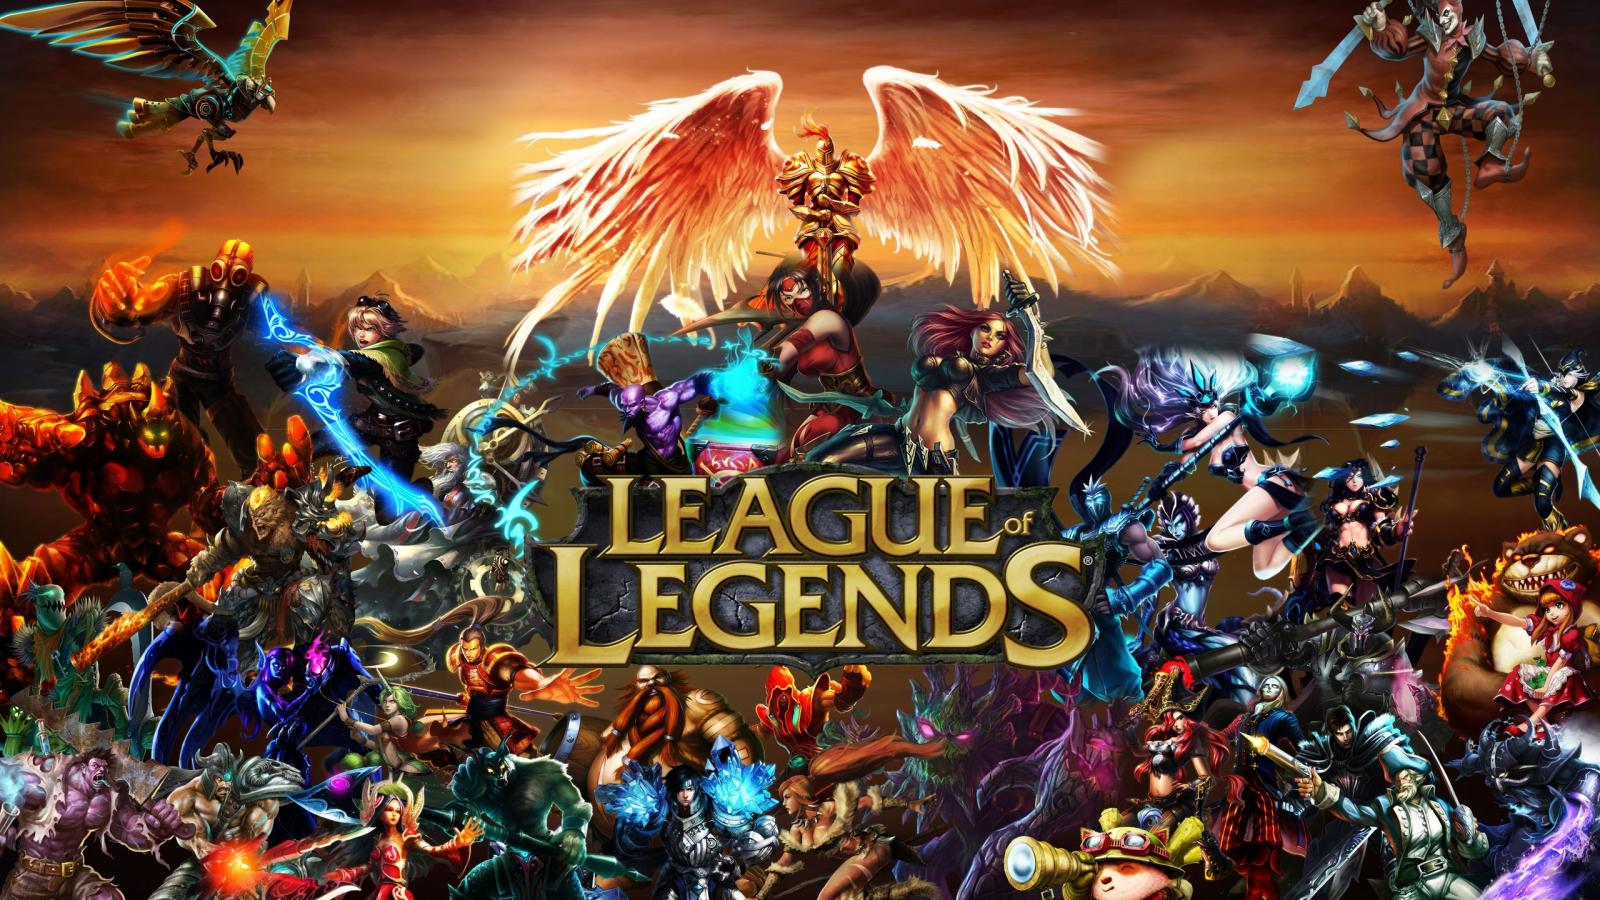 League of Legends Earns $624 Million in 2013 - New Report Reveals the Power of F2P Model